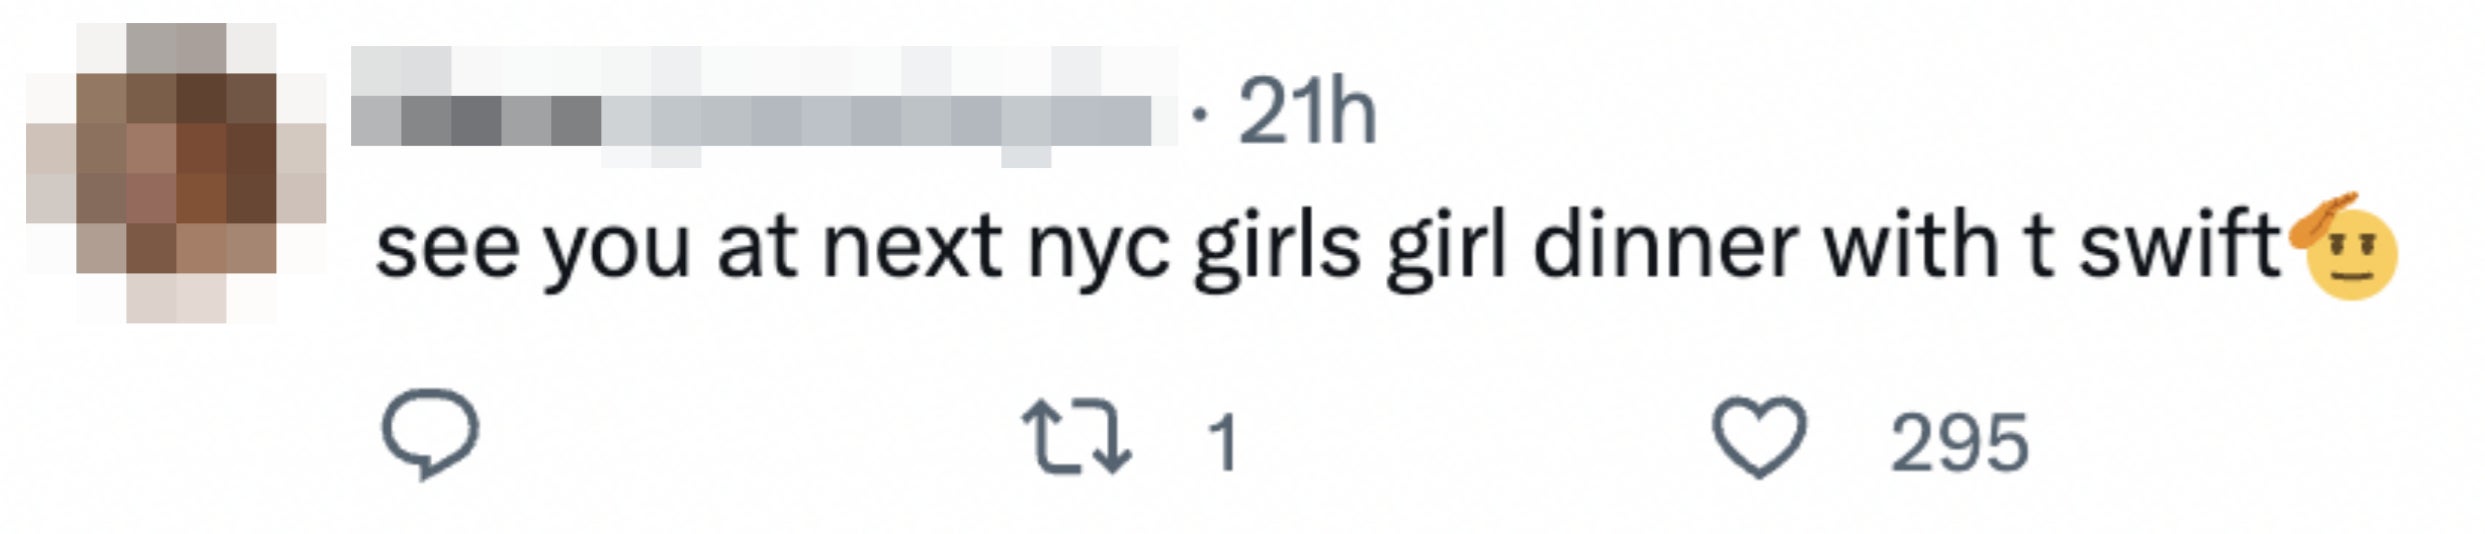 see you at the next nyc girls girl dinner with t swift